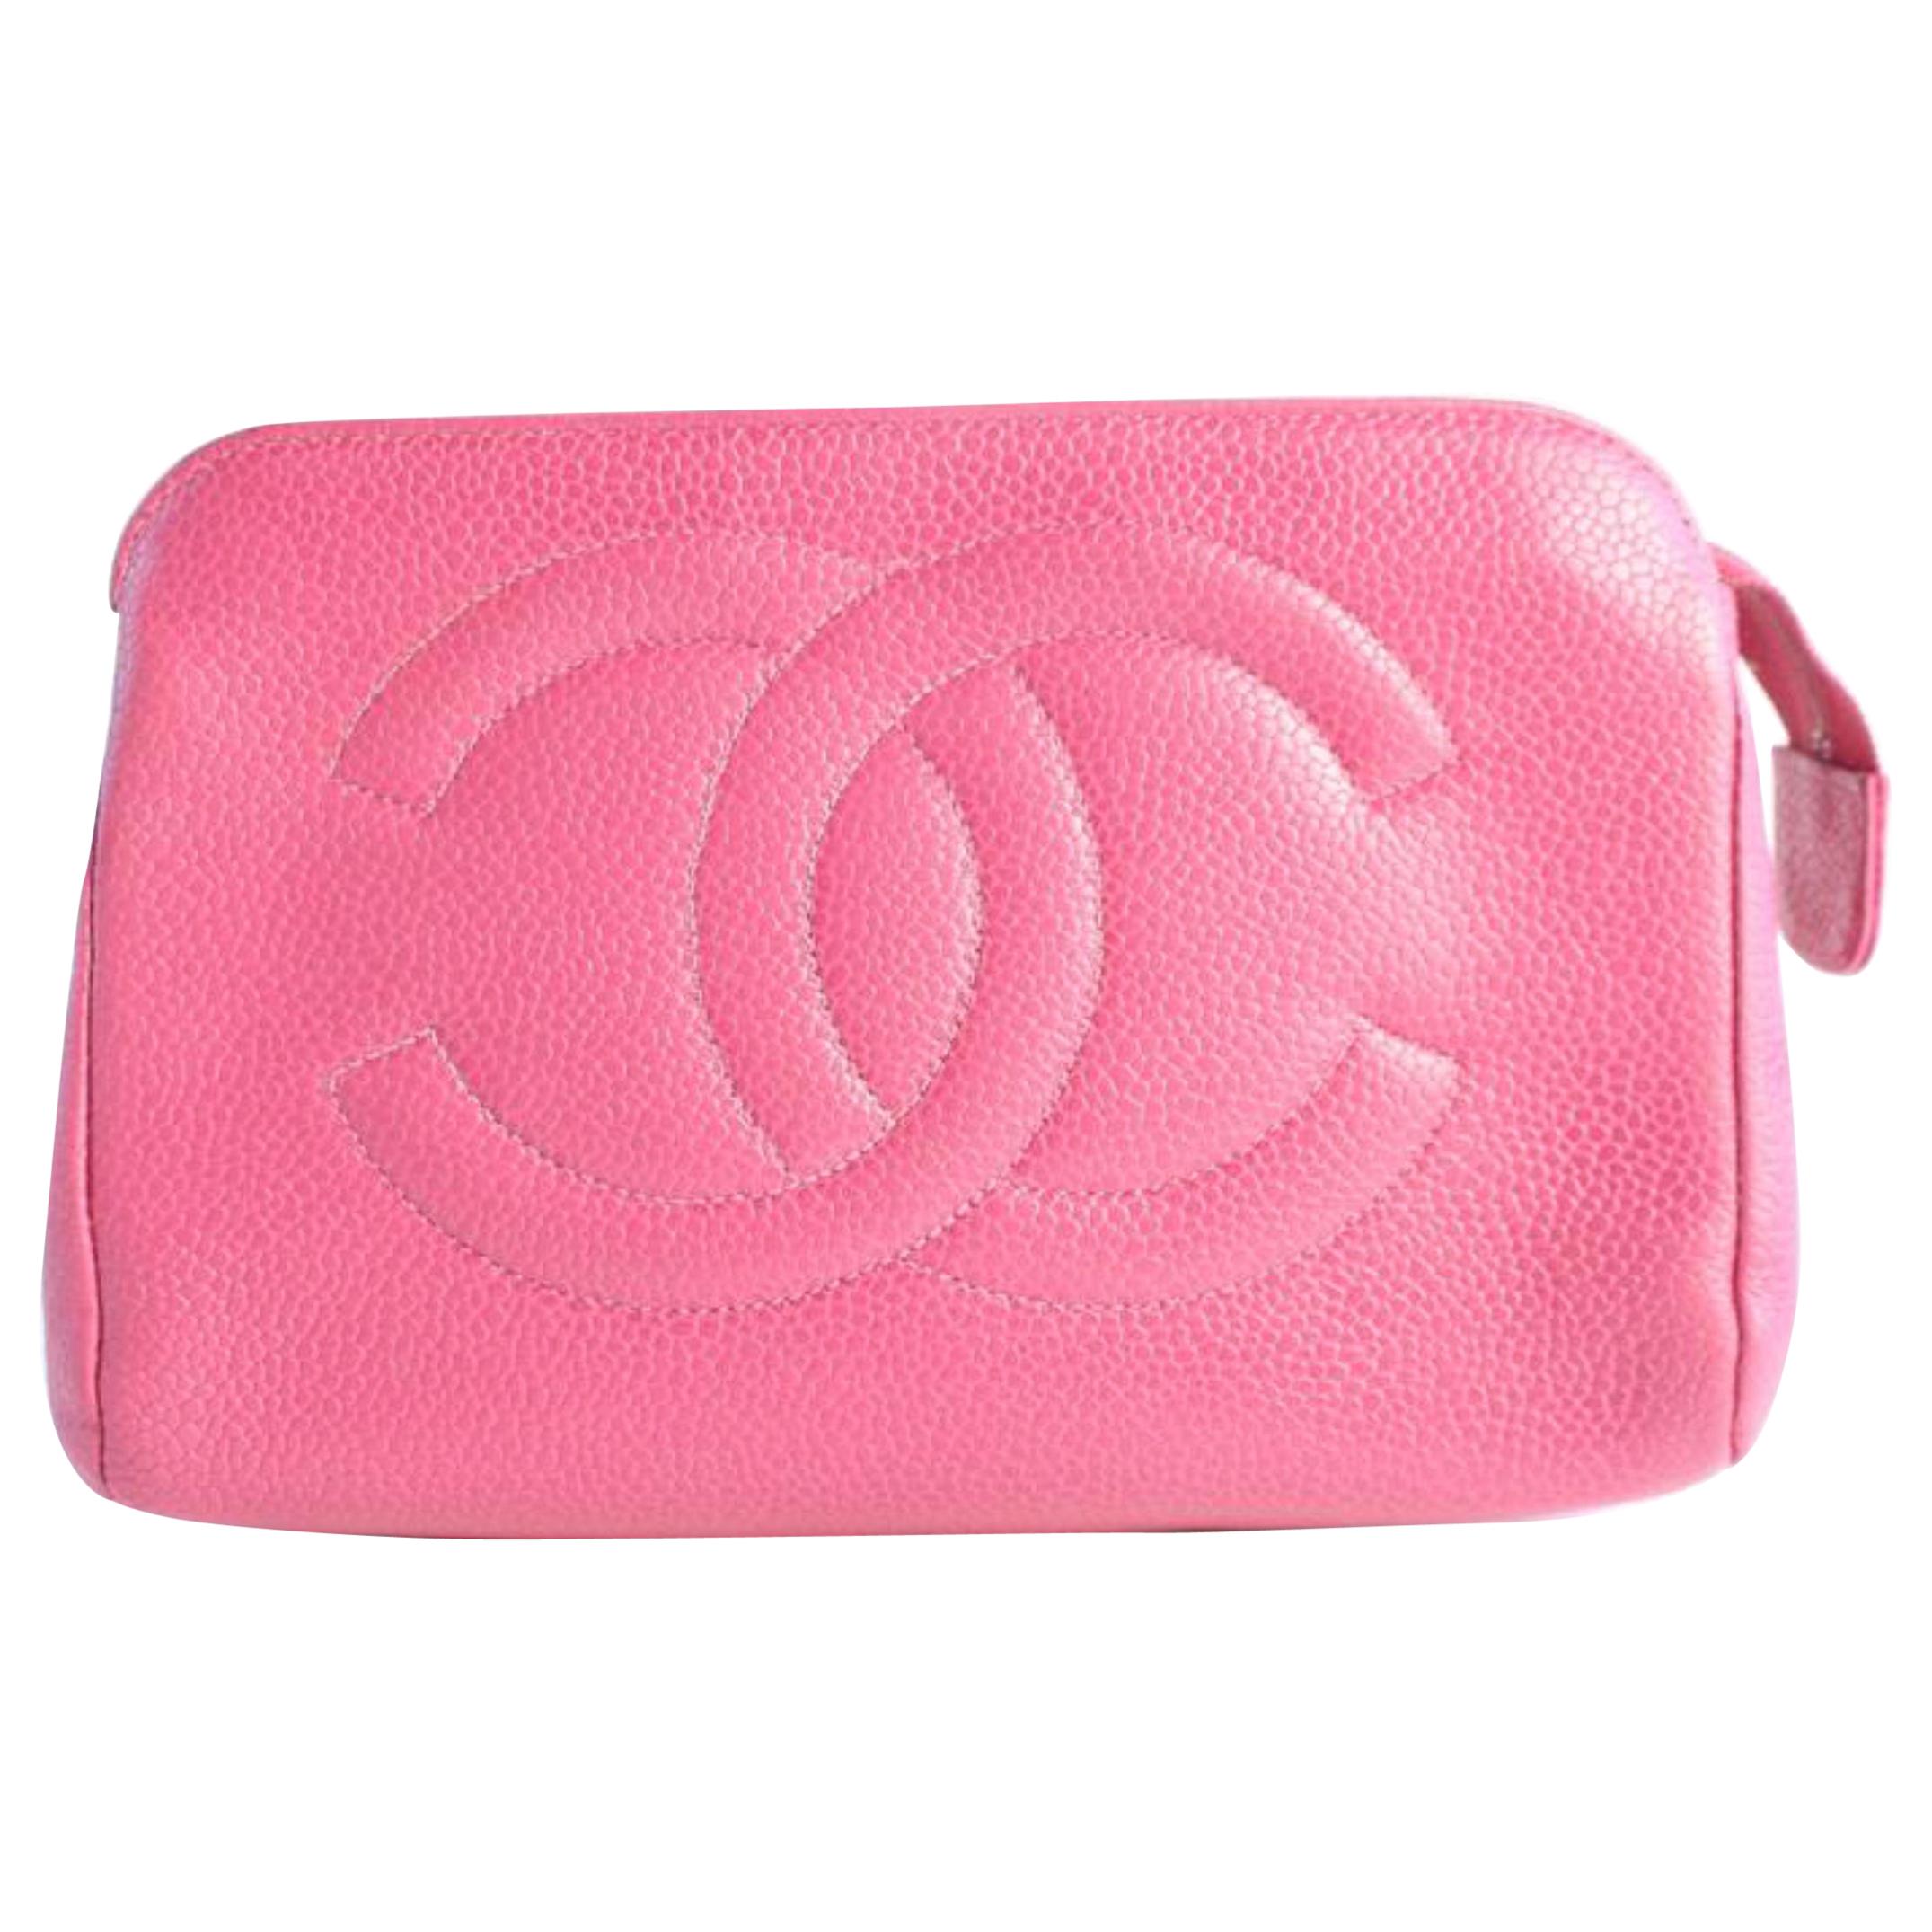 Chanel Cosmetic Hot Dark Zip Pouch 6cz0821 Pink Leather Clutch For Sale